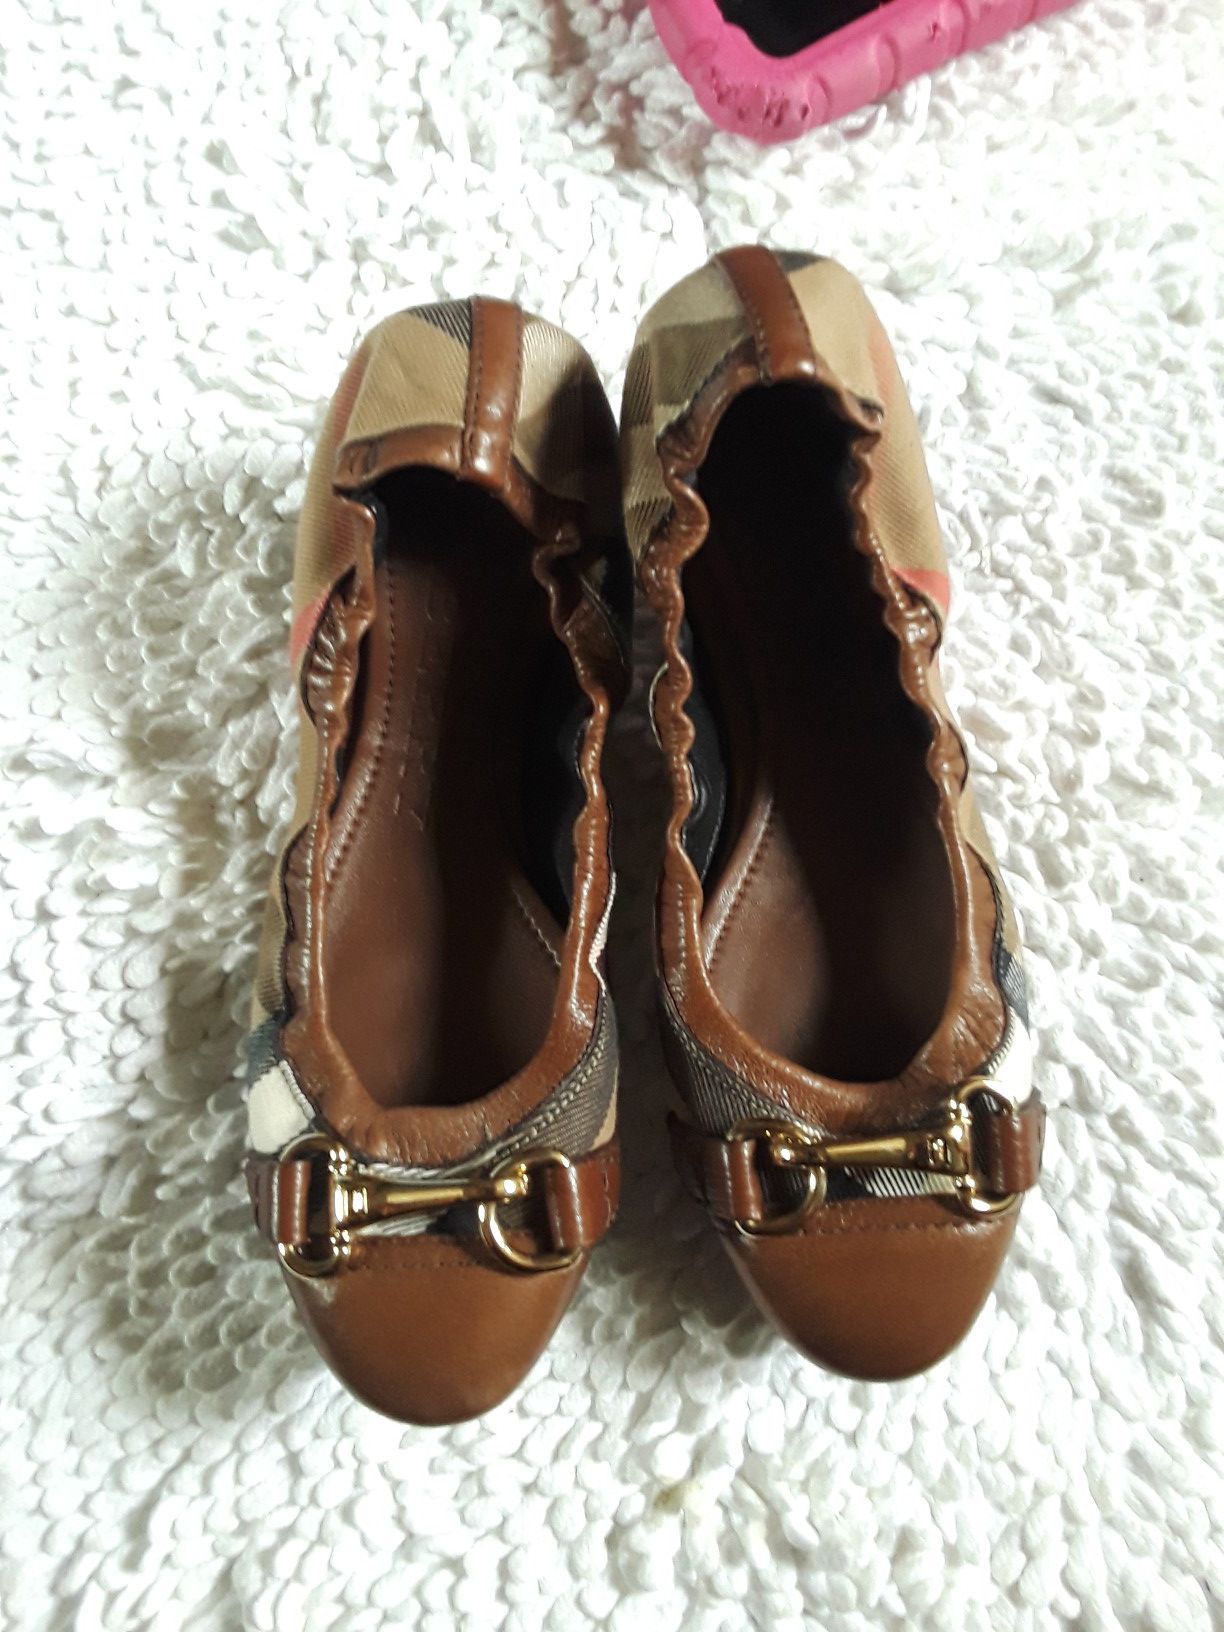 Burberry shoes great condition size 7